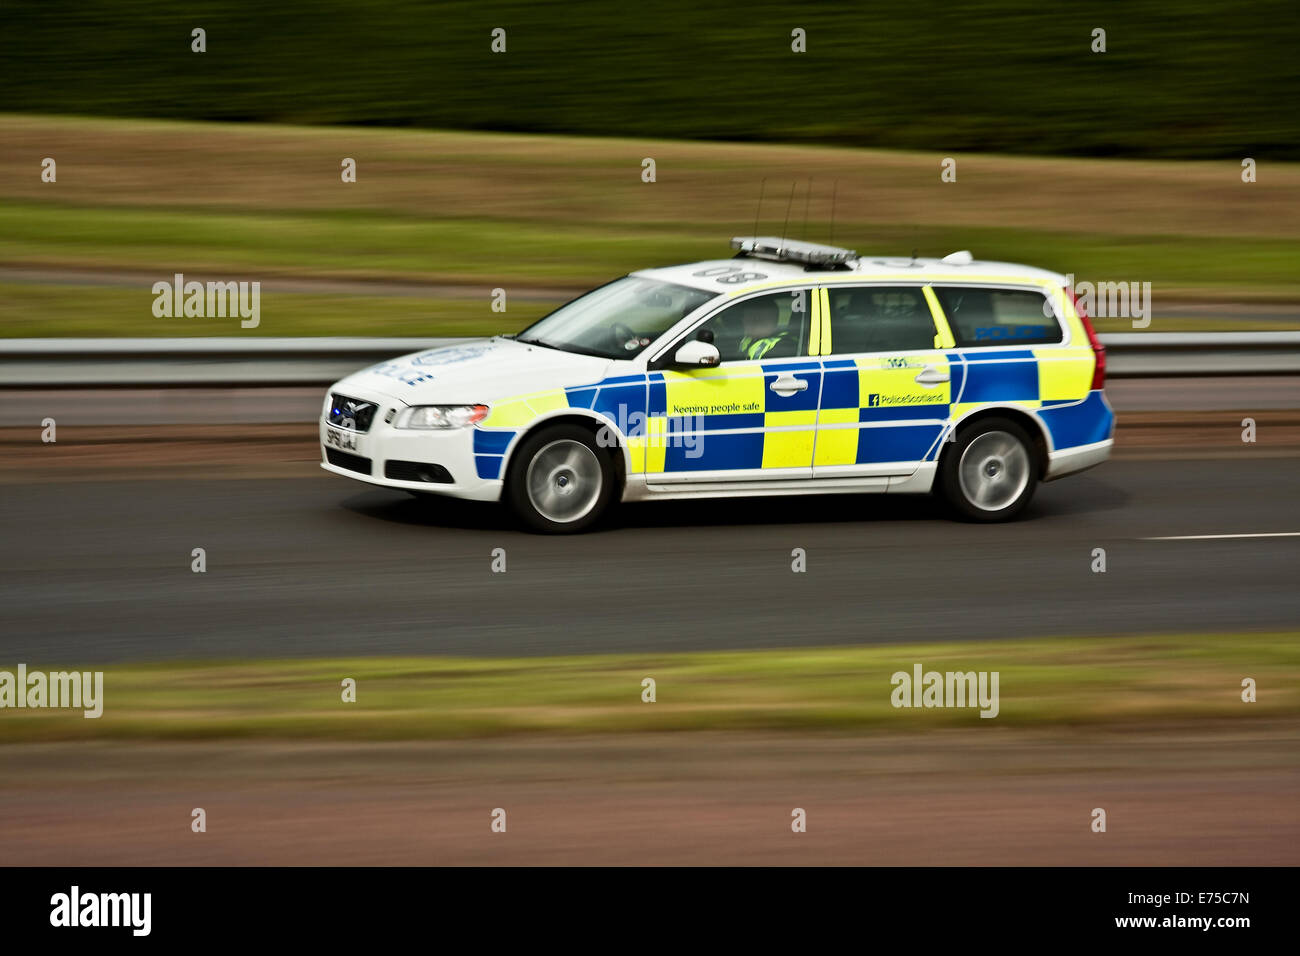 A Police Scotland police car responding at great speed to an emergency 999 call along the Kingsway West Dual Carriageway in urban Dundee, Scotland Stock Photo